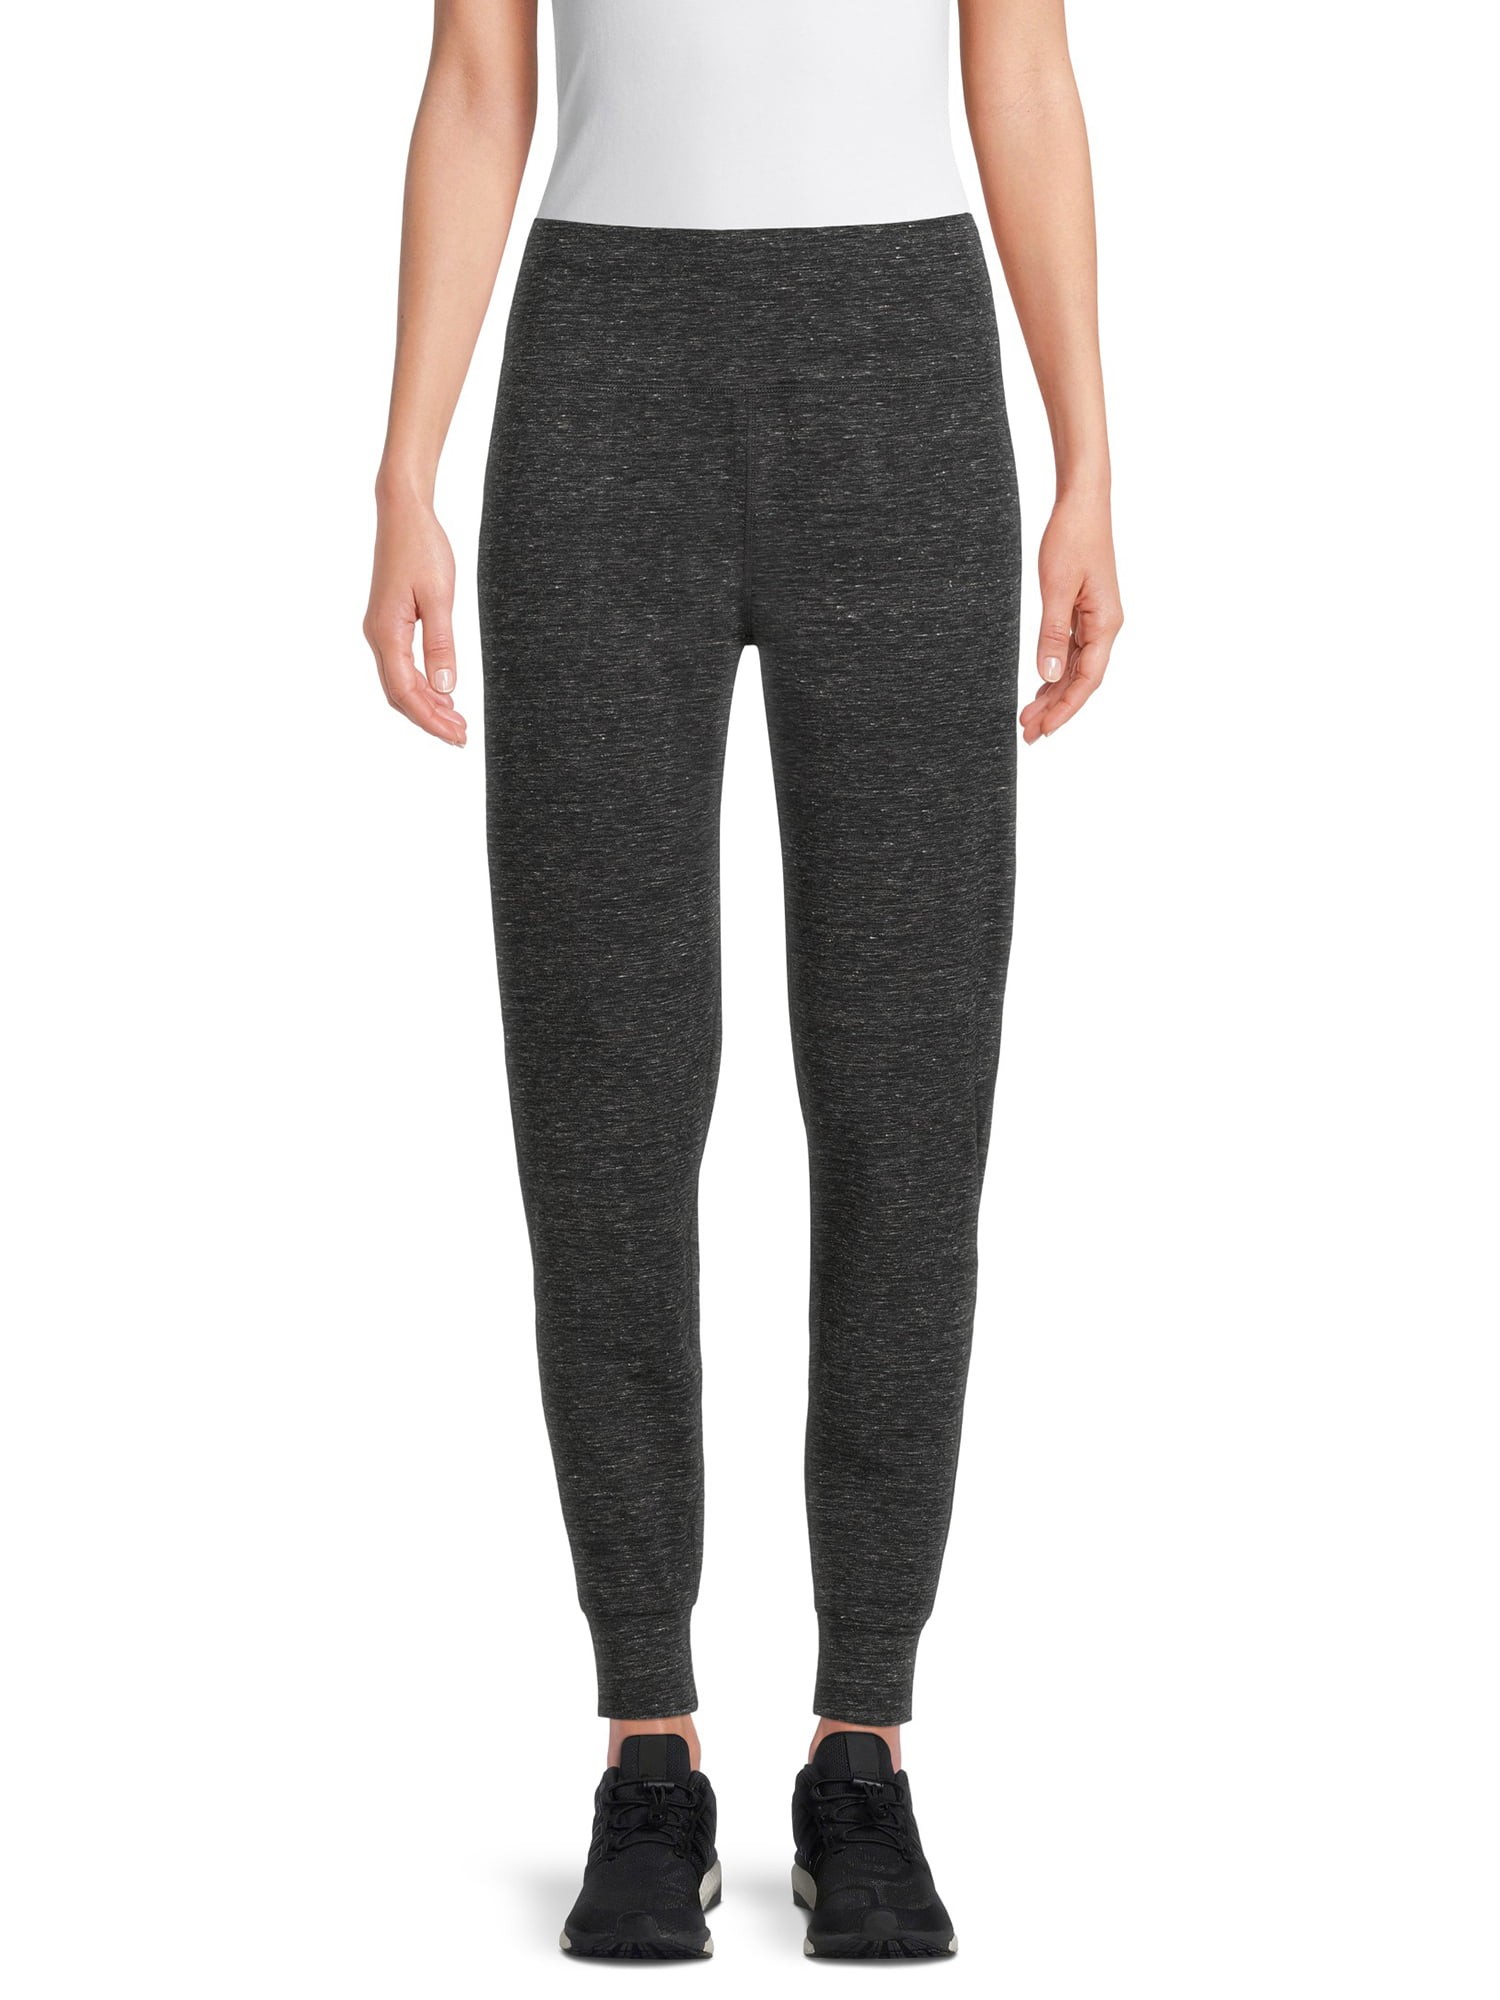 Athletic Works Women's Soft Joggers 